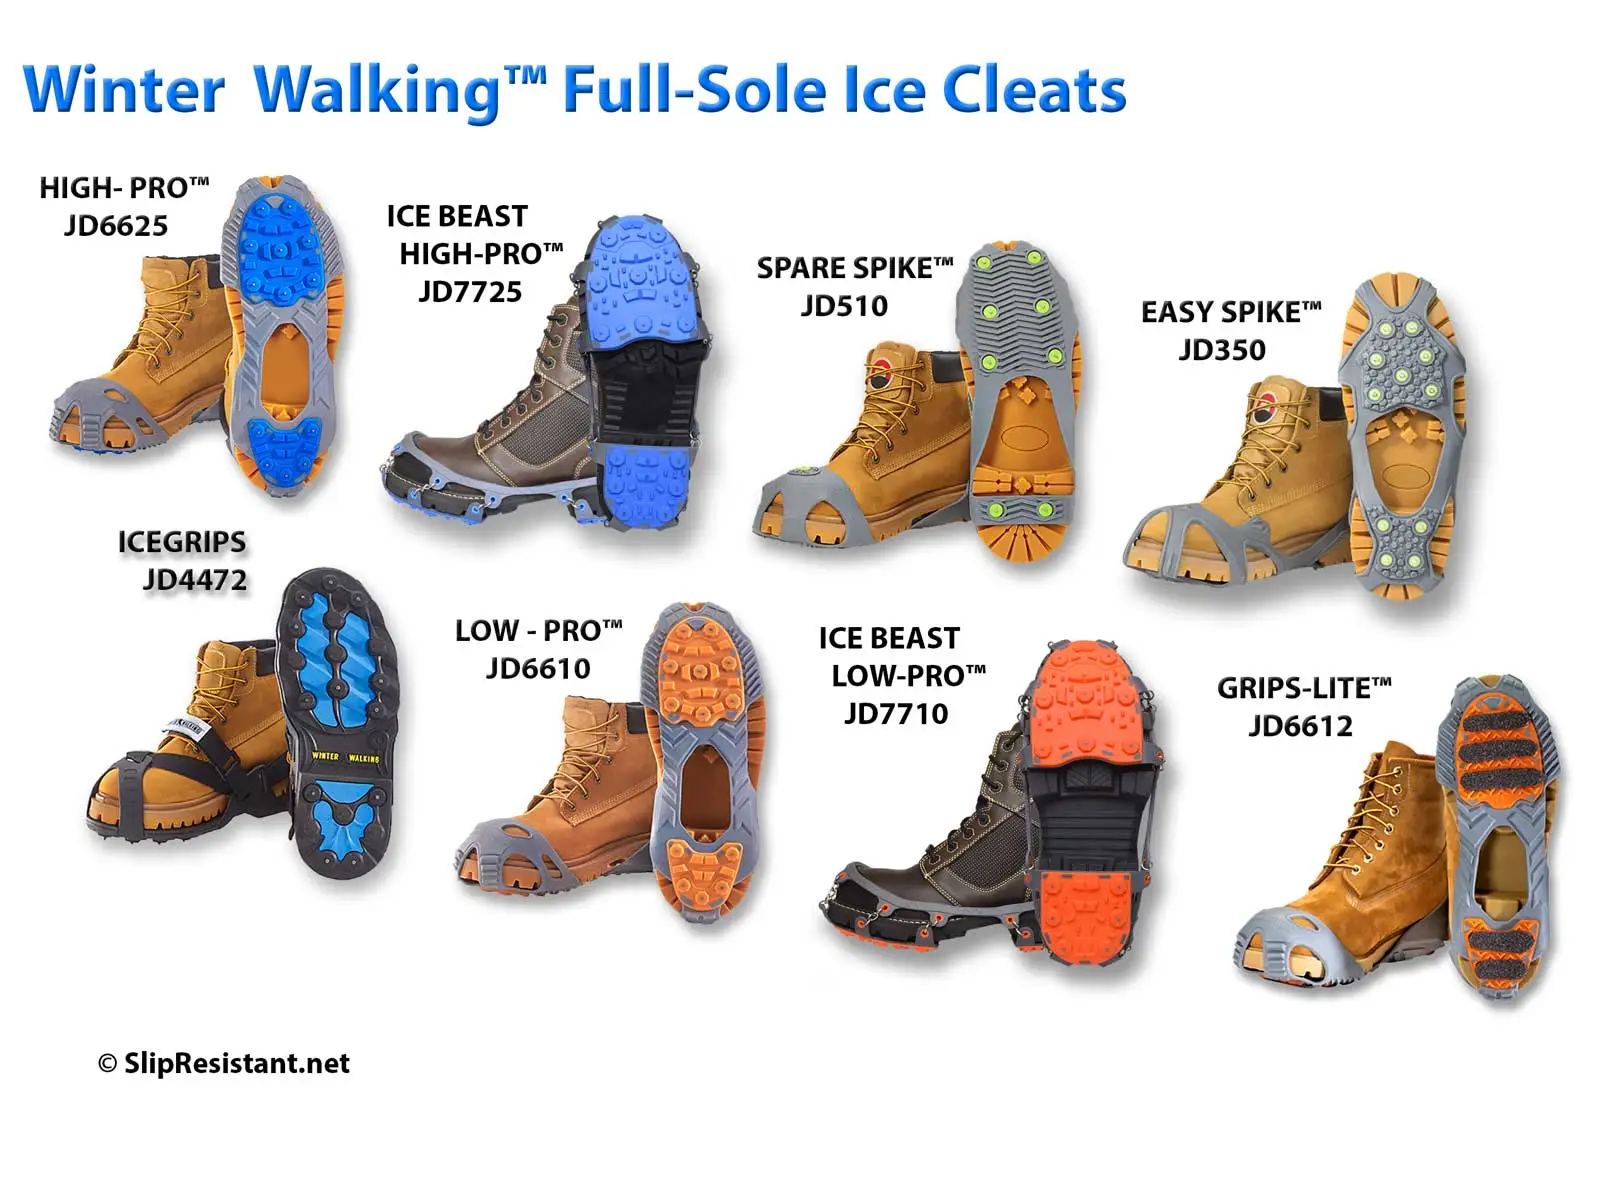 Ice Cleats, for Shoes & boots  Shoe Cleats, Grips, Ice Spikes